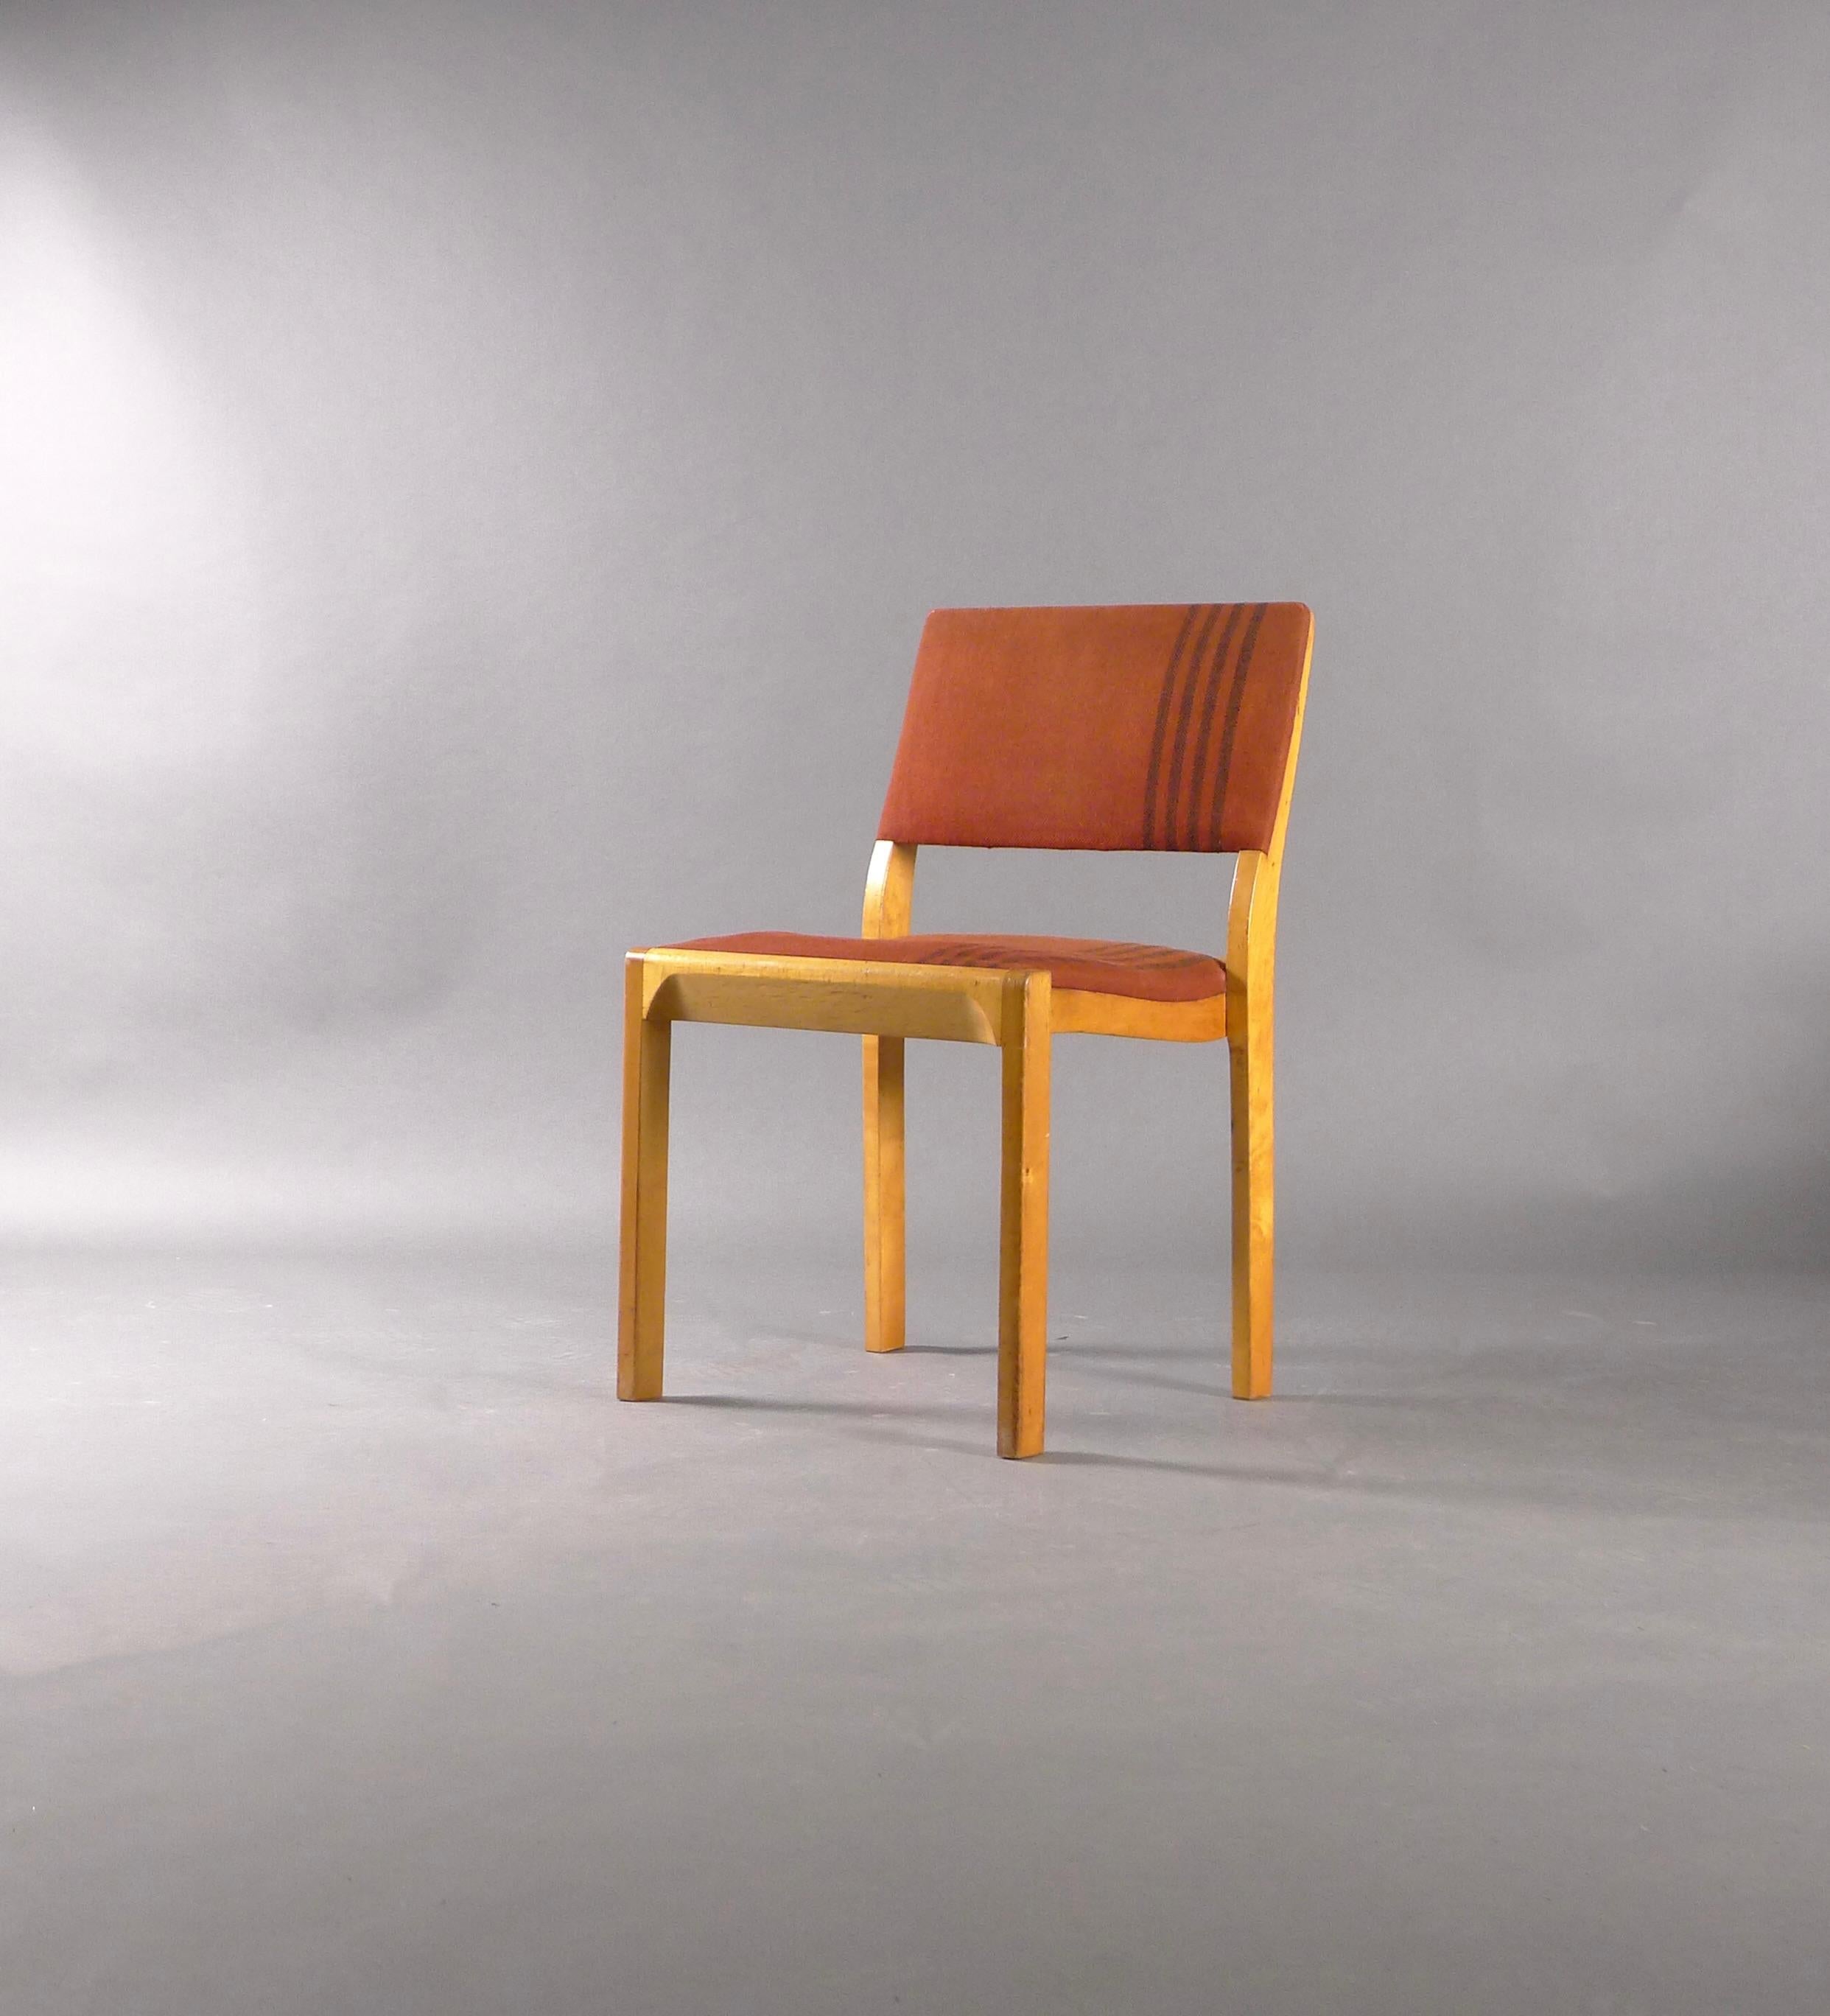 Model 611 birch stacking chair, designed in 1929 by Alvar Aalto and made by Finmar, Finland.  This is an extremely rare variant with original red fabric, the design believed to be the work of Aalto's wife Aino.  An early production example with